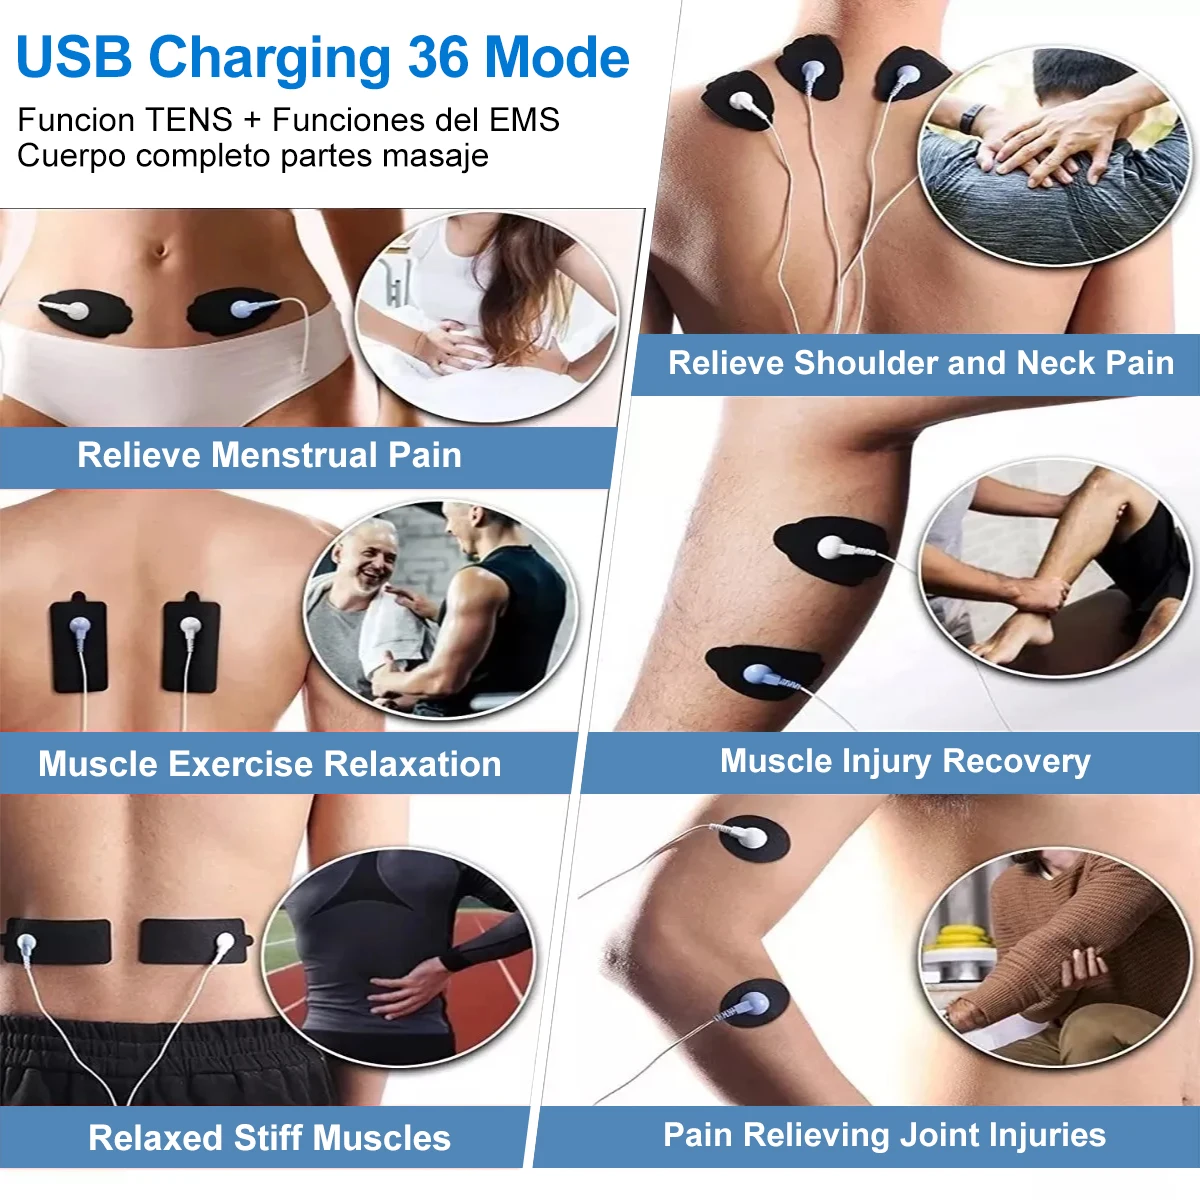 EMS TENS Muscle Electrostimulator Tens Unit Low Frequency Pulse Body Relaxing Massage Digital Meridian Physiotherapy Pain Relief